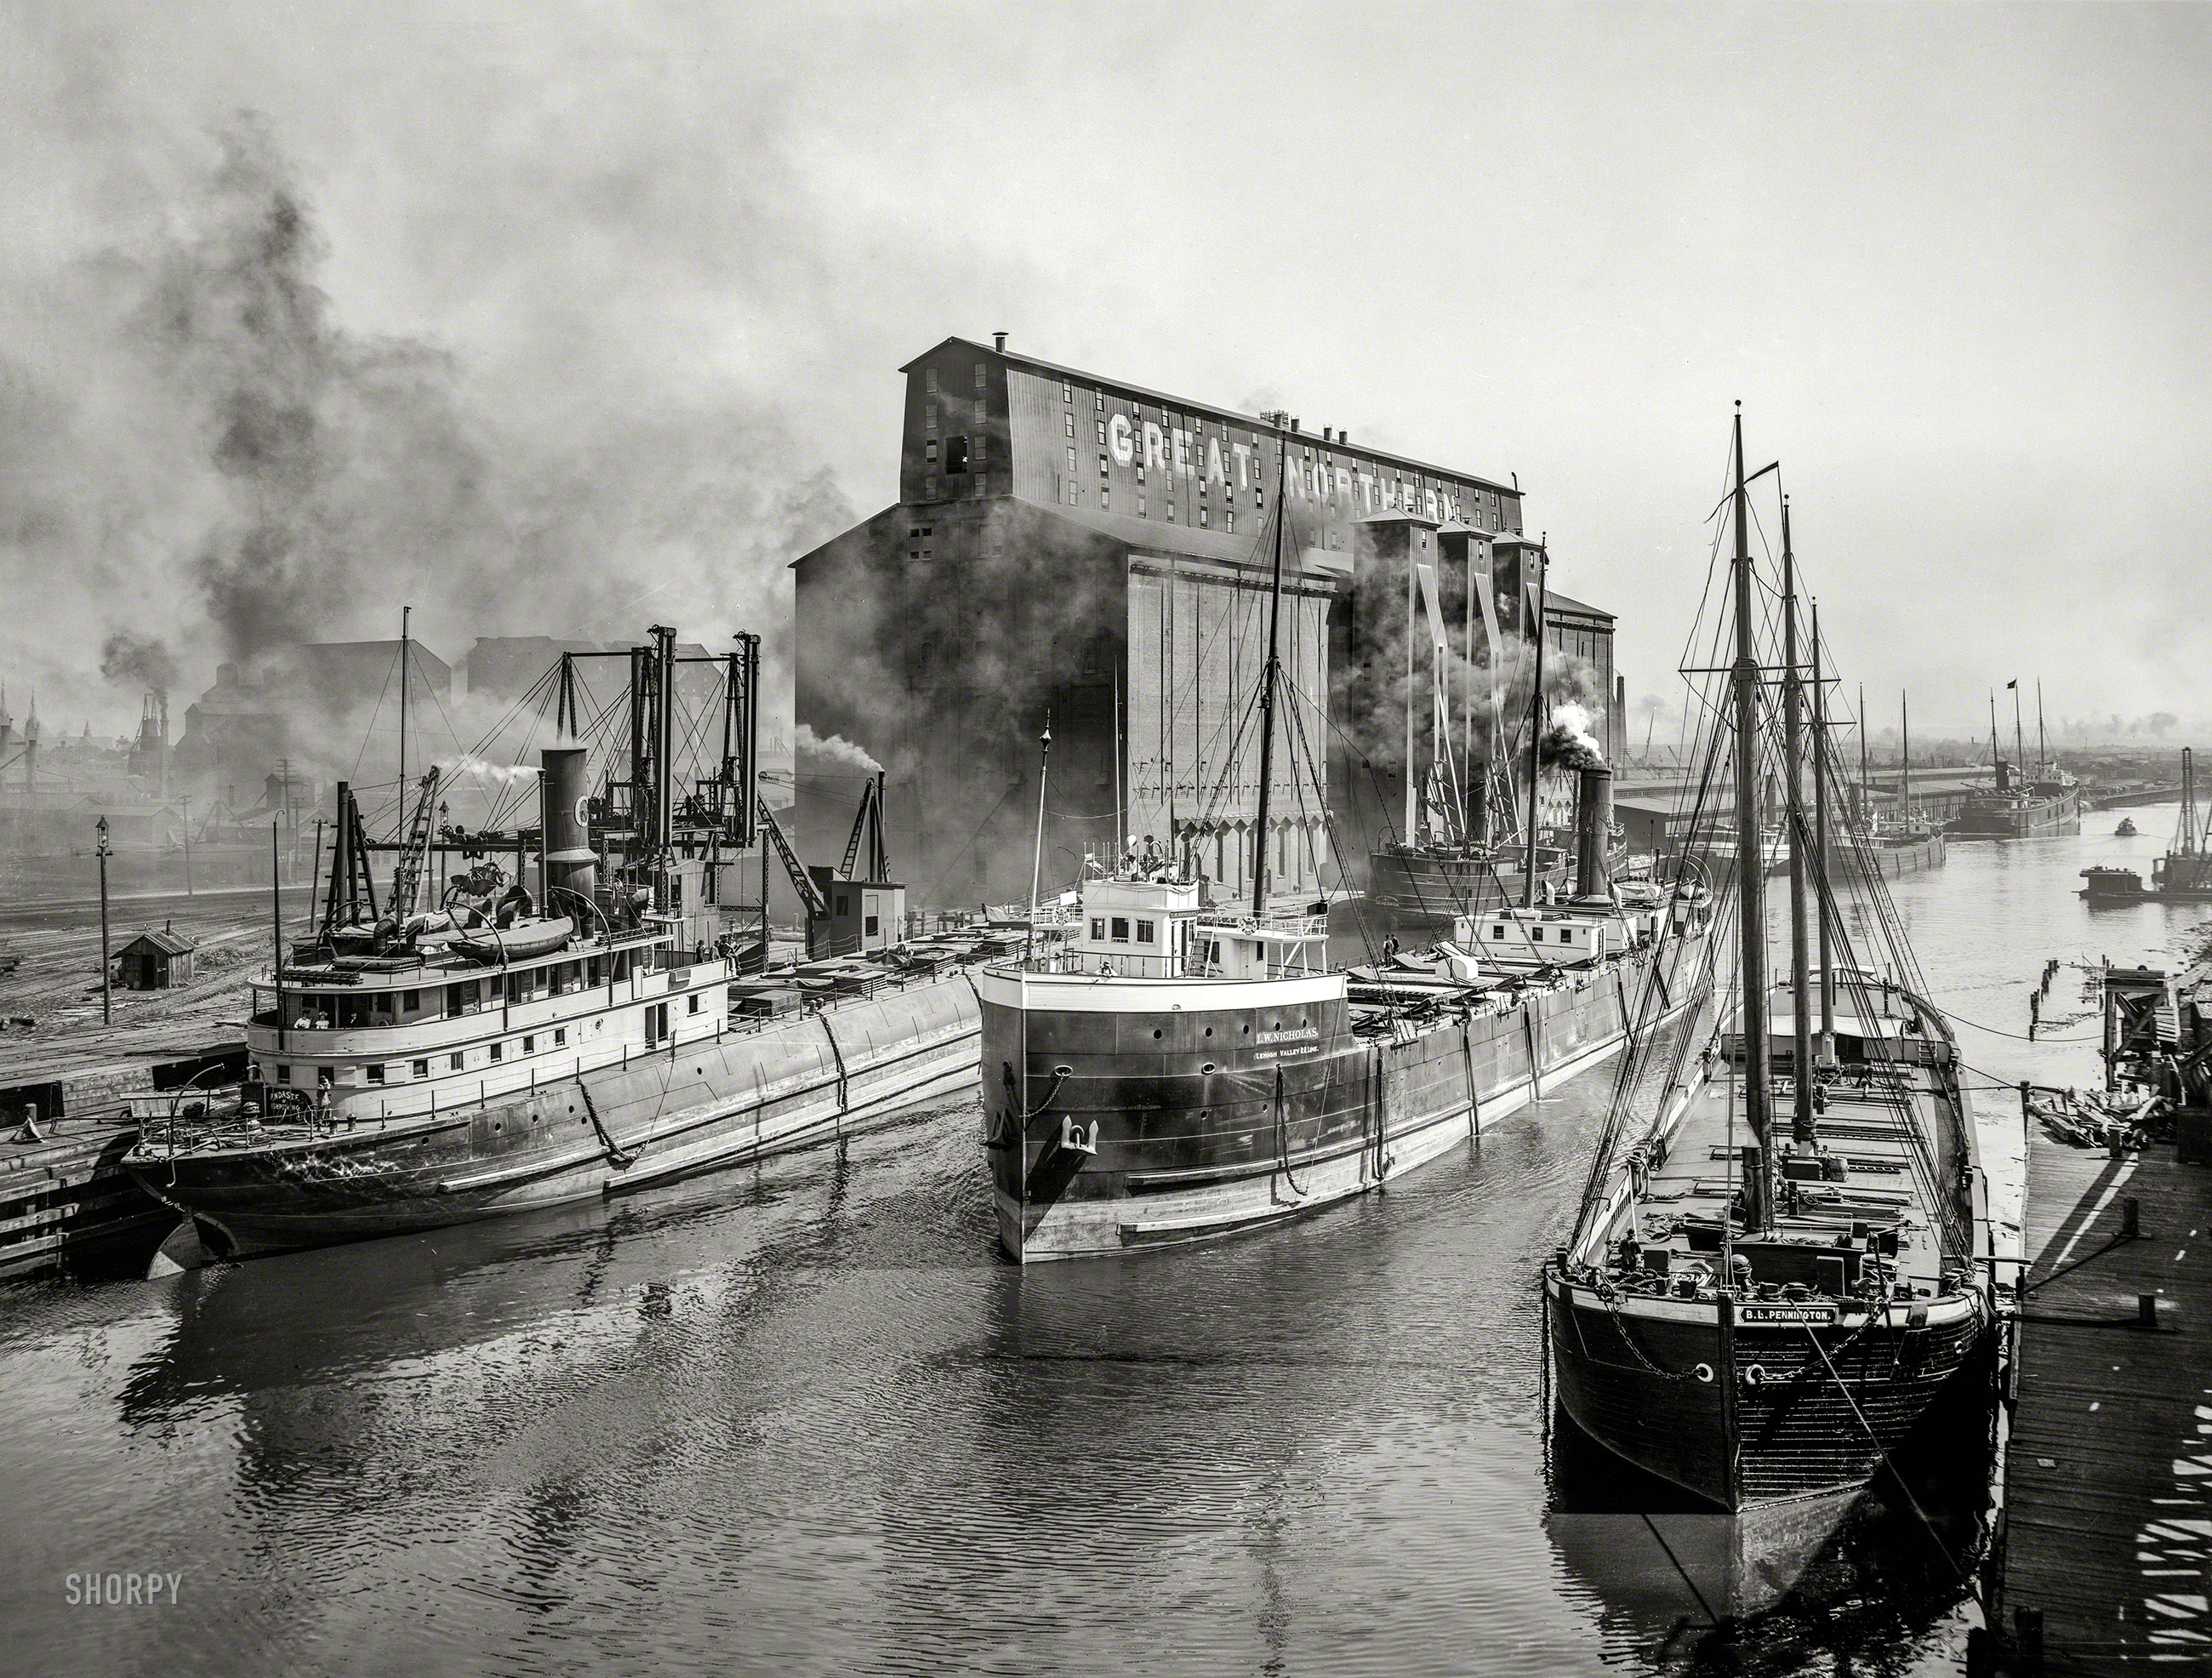 Buffalo, New York, circa 1900. "Great Northern elevator and shipping." The freighters Andaste of Ishpeming, I.W. Nicholas and B.L. Pennington. 8x10 inch dry plate glass negative, Detroit Publishing Company. View full size.